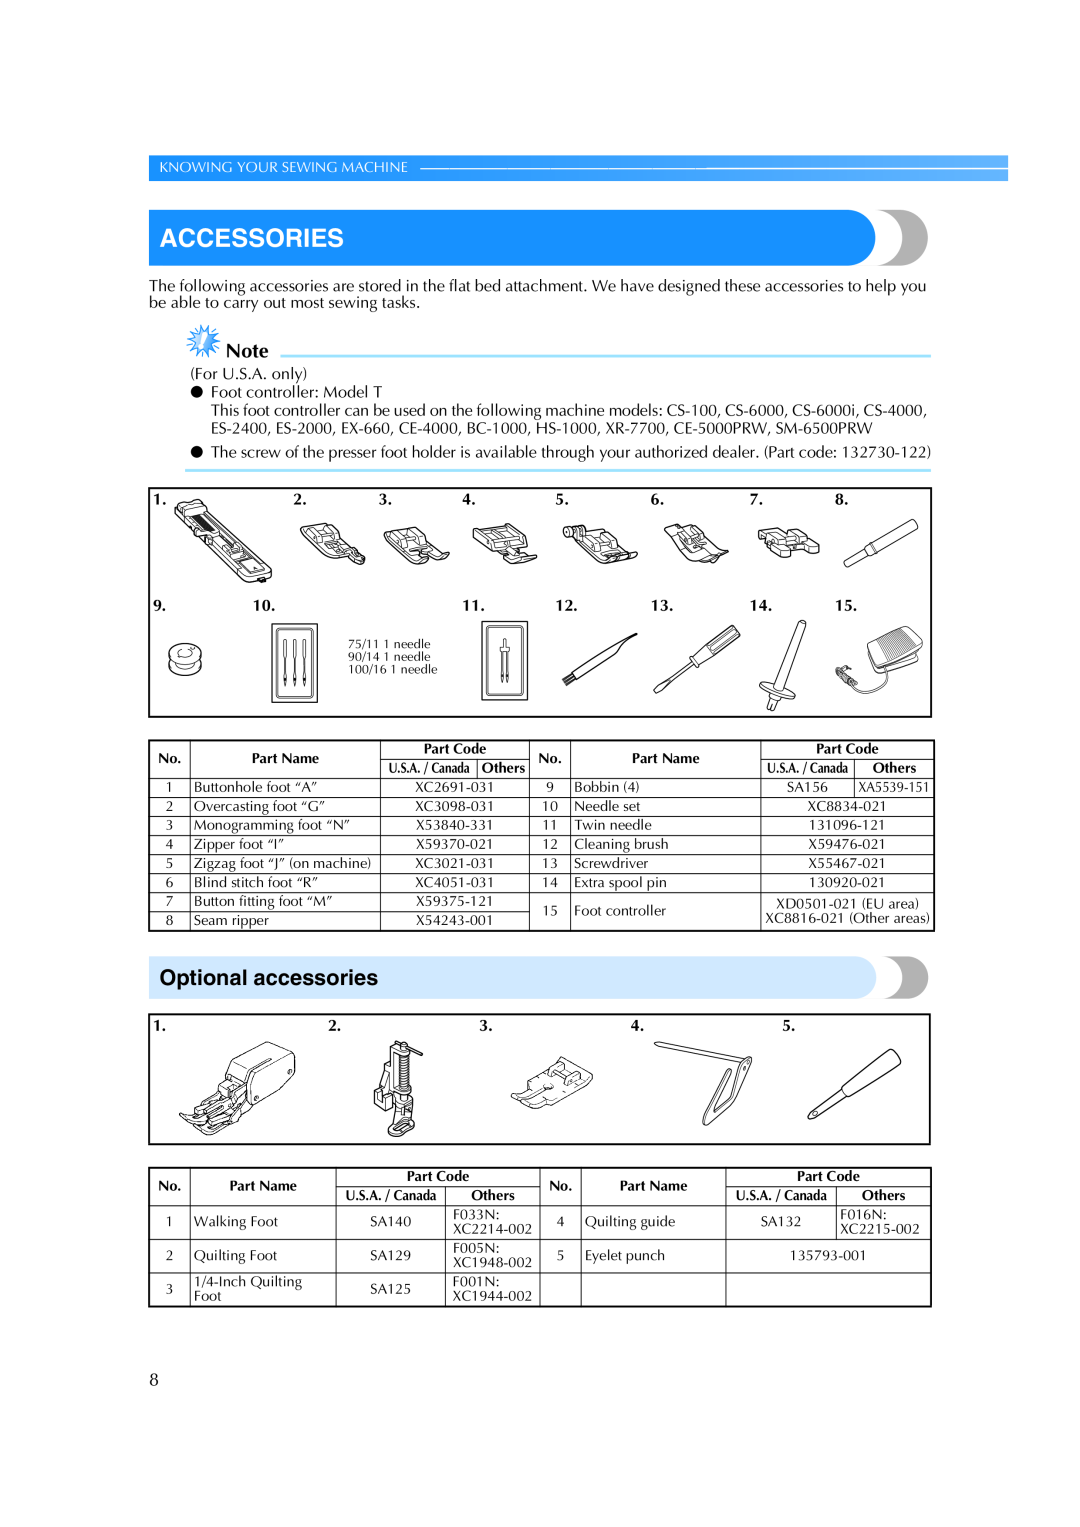 Brother CE 500PRW operation manual Accessories, Optional accessories 